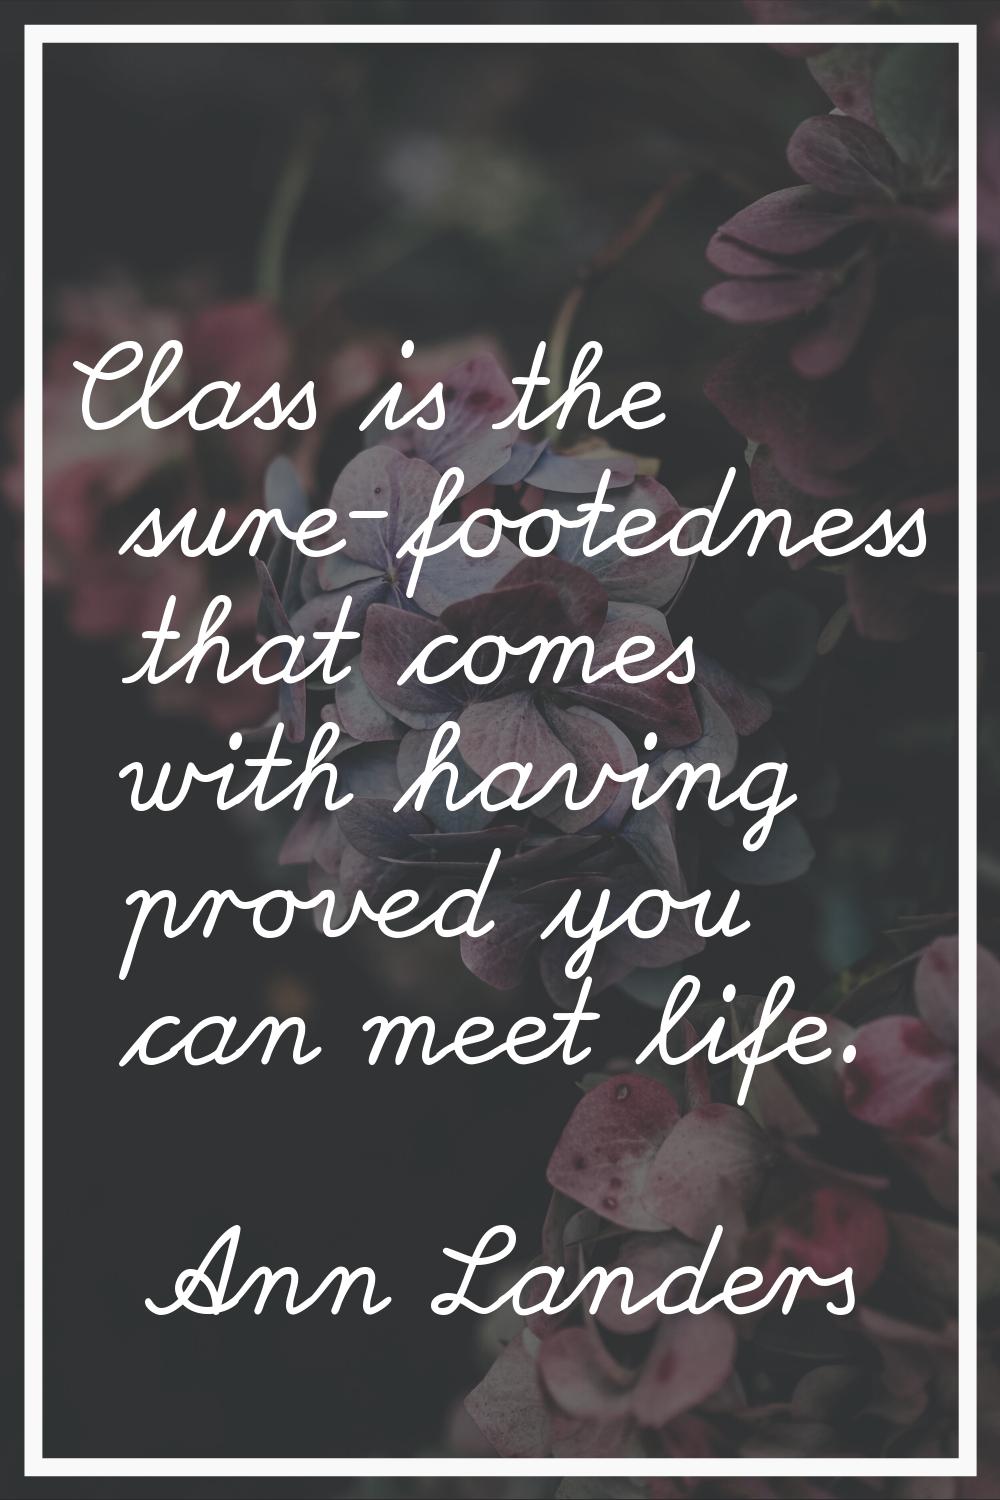 Class is the sure-footedness that comes with having proved you can meet life.